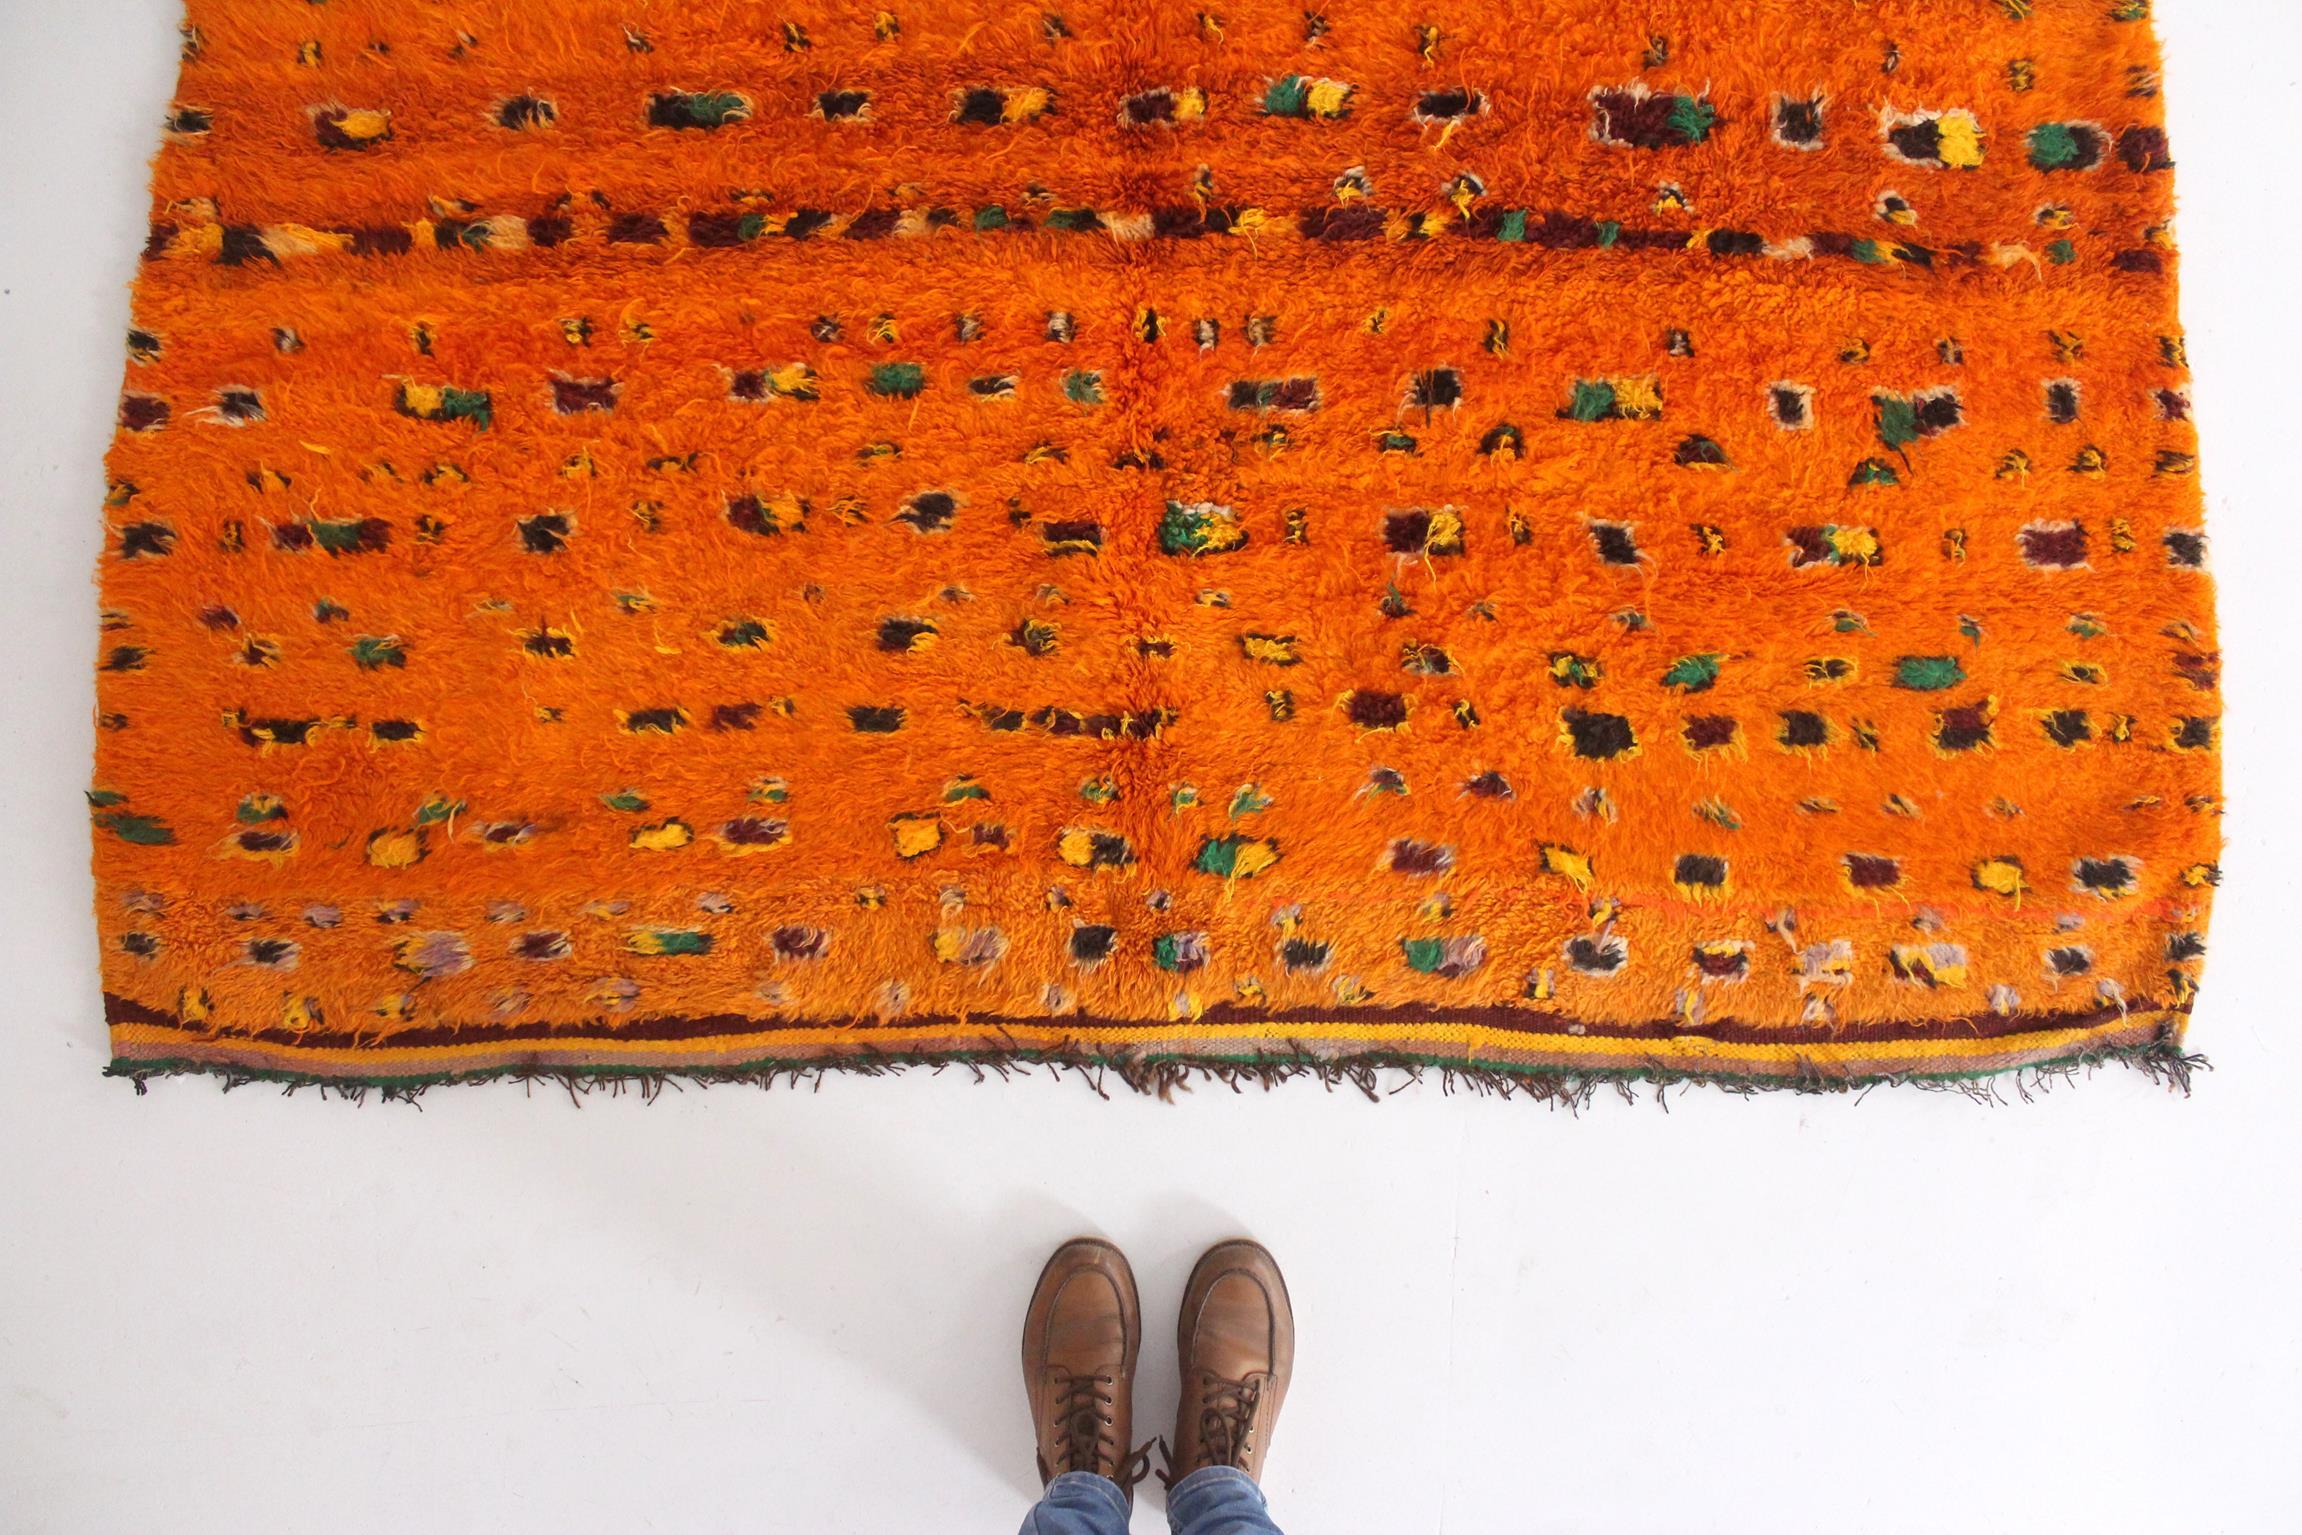 Vintage Moroccan wool rug - Orange - 6.5x10.5feet / 198x320cm In Good Condition For Sale In Marrakech, MA